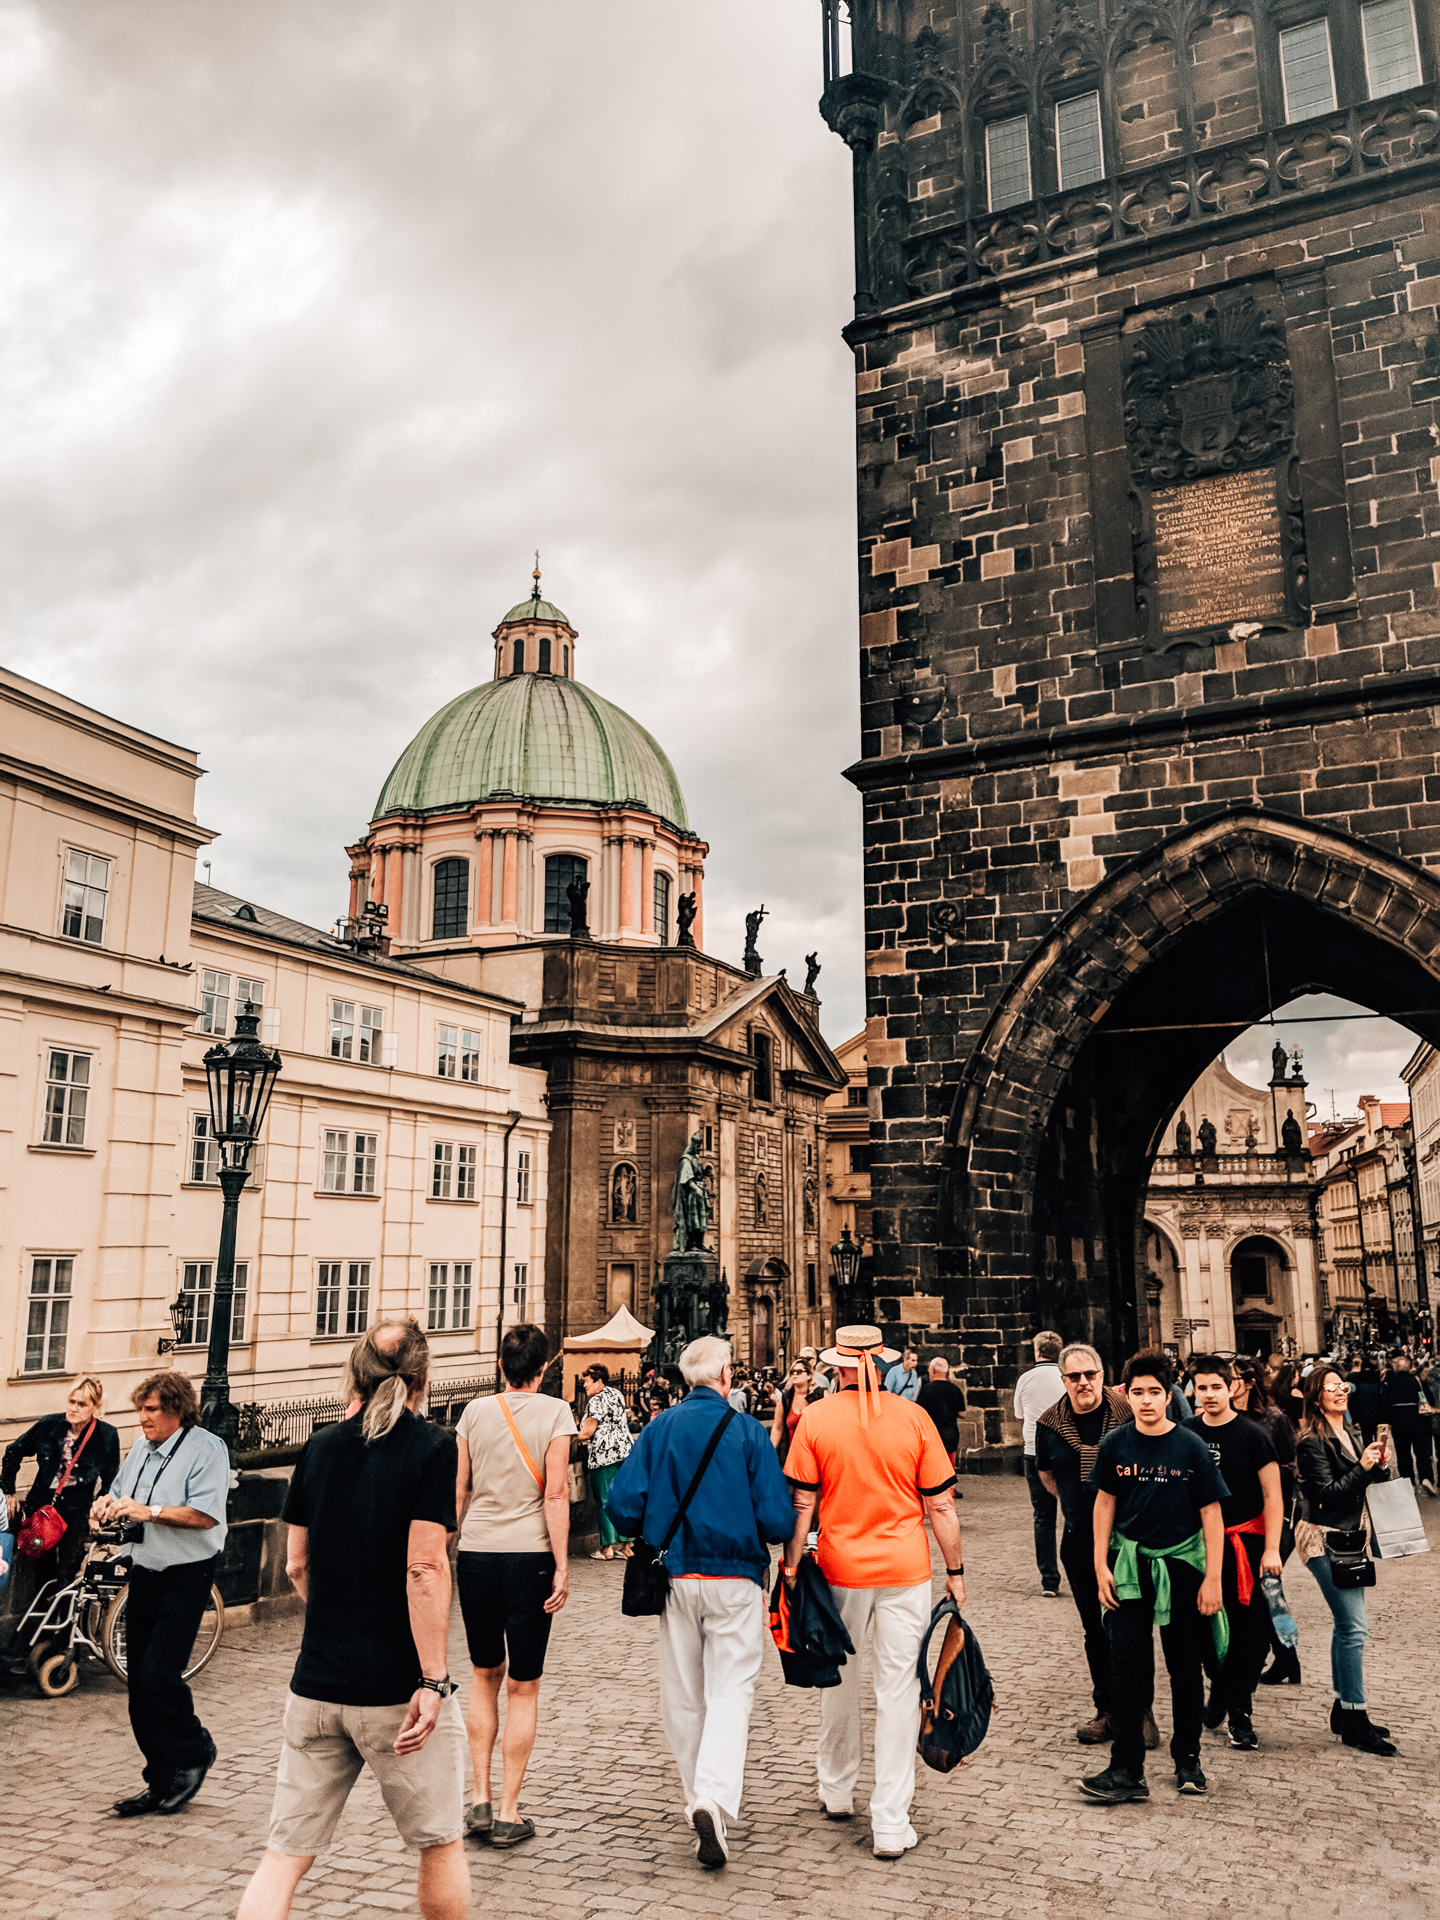 Charles Bridge - Top 10 Things to do in Prague featured by popular Boston travel blogger, Sunny Coastlines